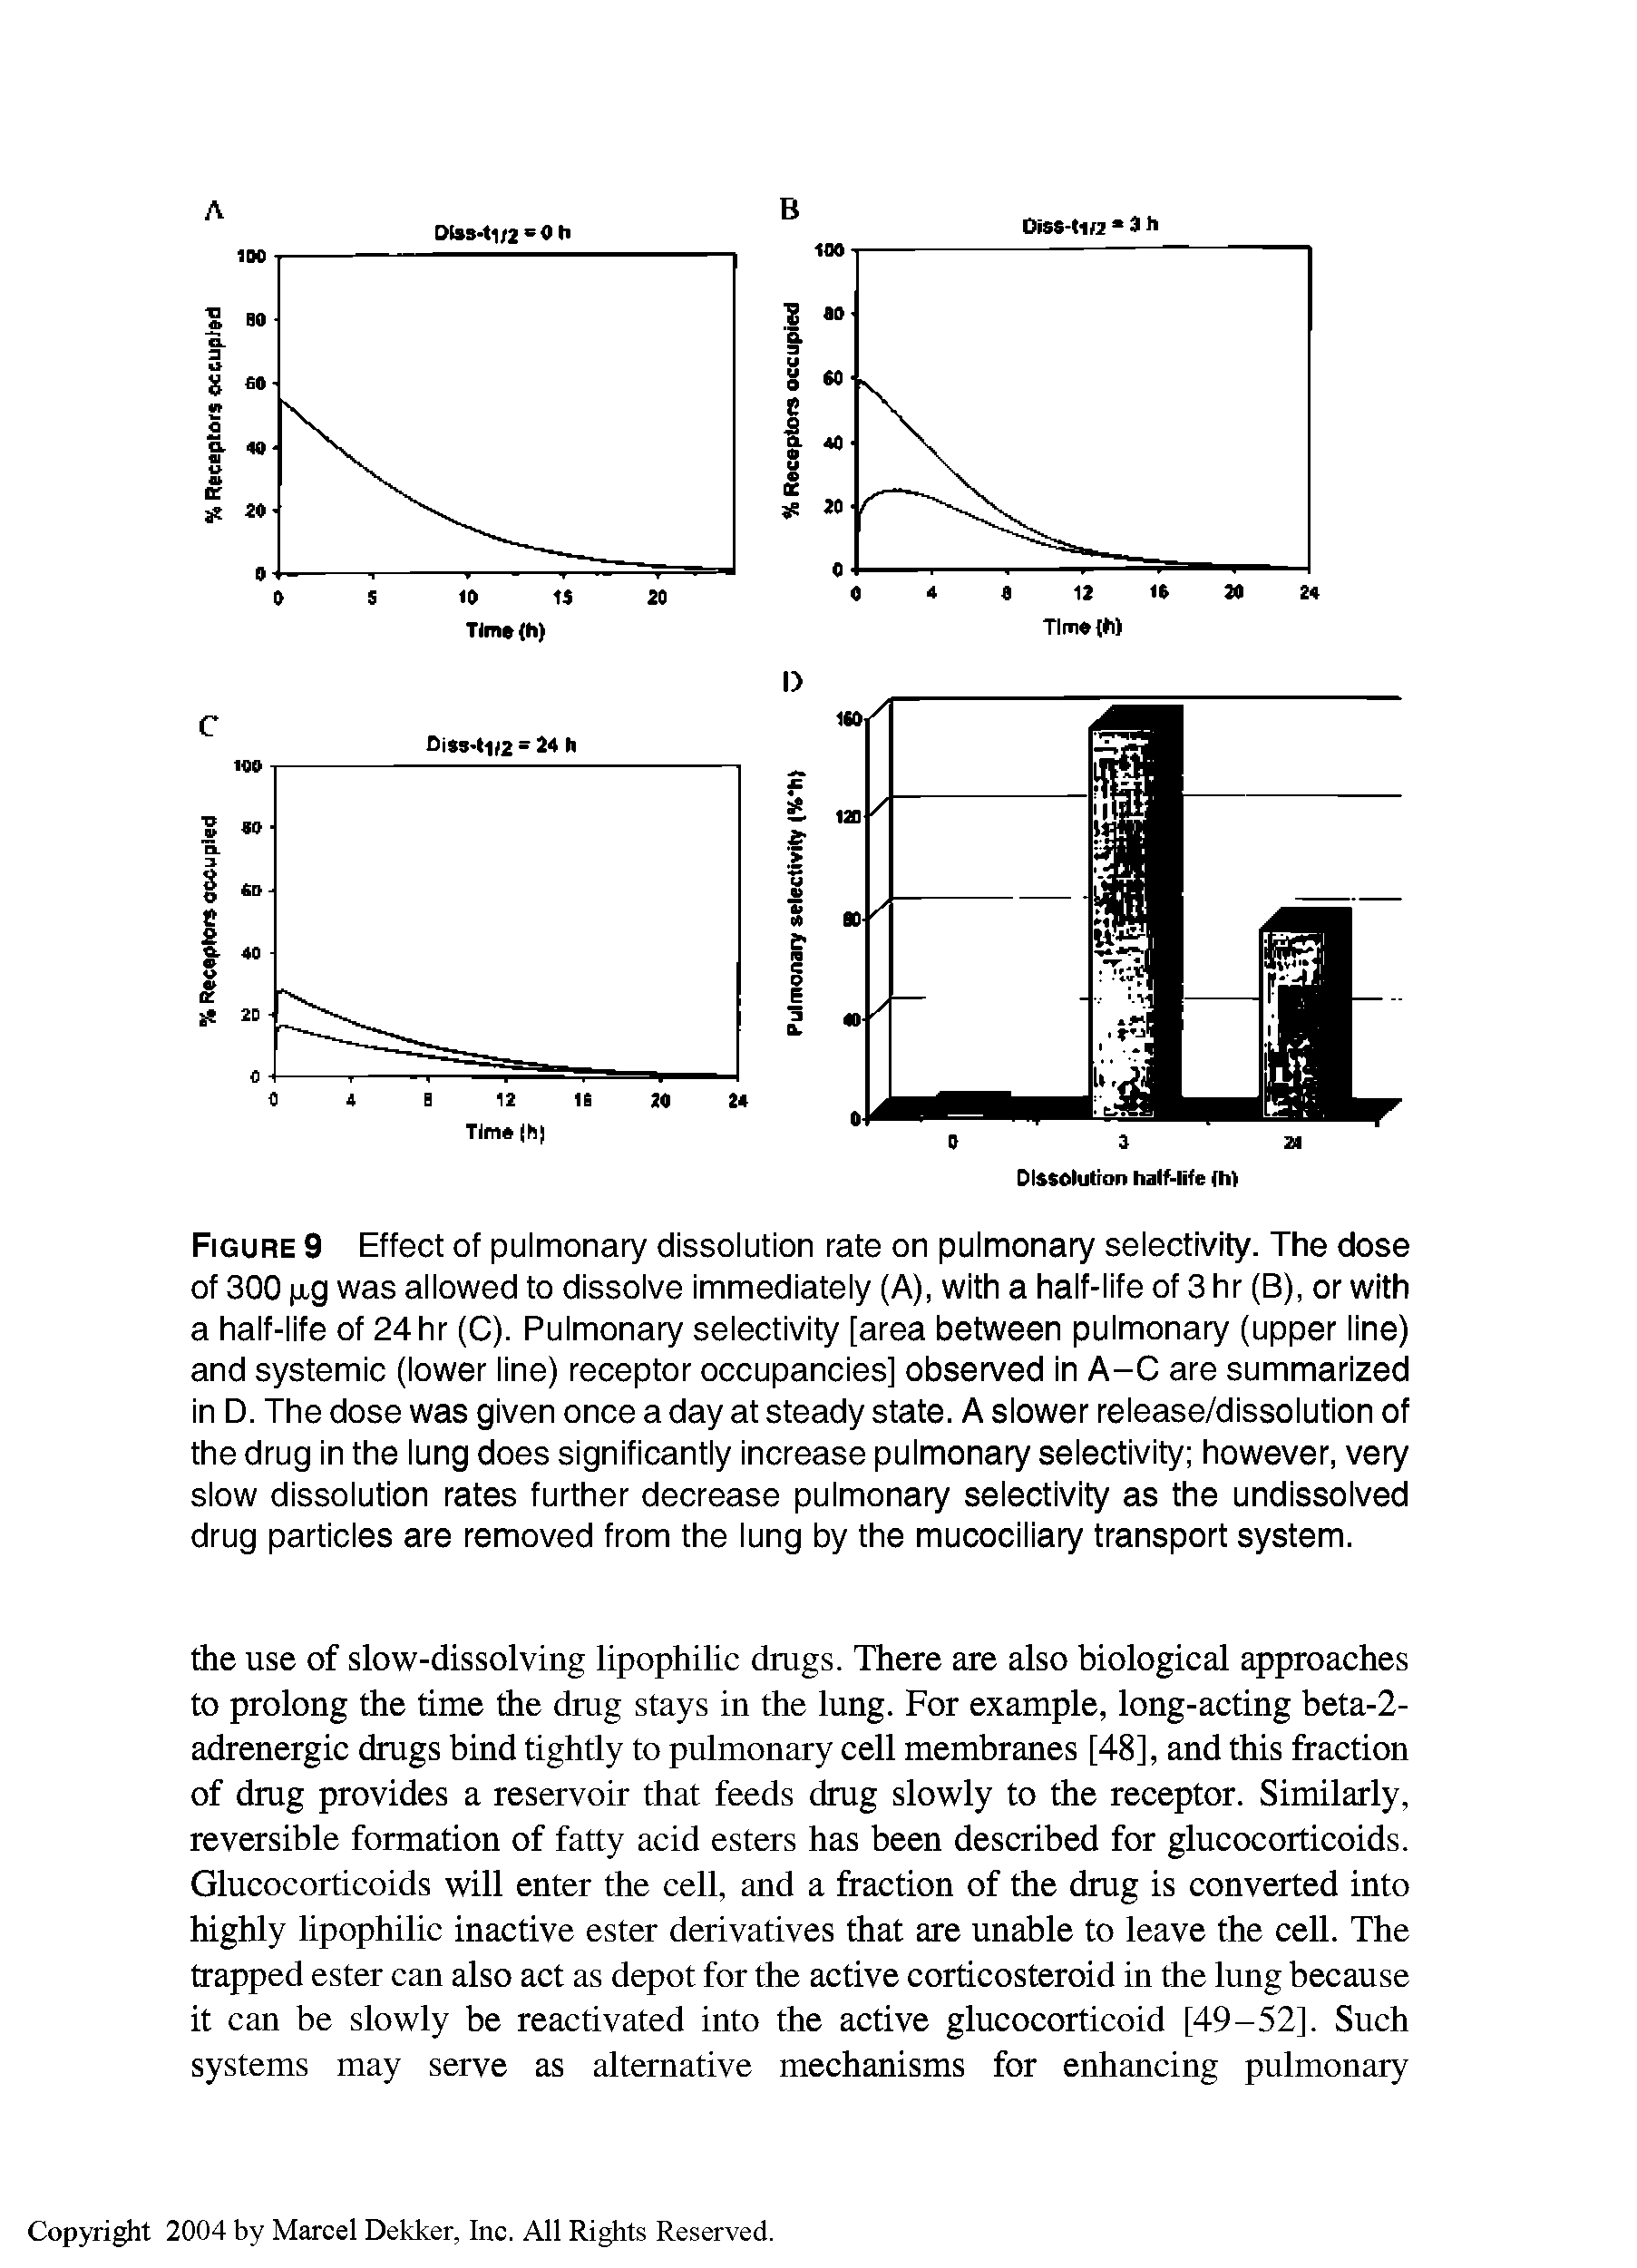 Figure 9 Effect of pulmonary dissolution rate on pulmonary selectivity. The dose of 300 p,g was allowed to dissolve immediately (A), with a half-life of 3 hr (B), or with a half-life of 24 hr (C). Pulmonary selectivity [area between pulmonary (upper line) and systemic (lower line) receptor occupancies] observed in A-C are summarized in D. The dose was given once a day at steady state. A slower release/dissolution of the drug in the lung does significantly increase pulmonary selectivity however, very slow dissolution rates further decrease pulmonary selectivity as the undissolved drug particles are removed from the lung by the mucociliary transport system.